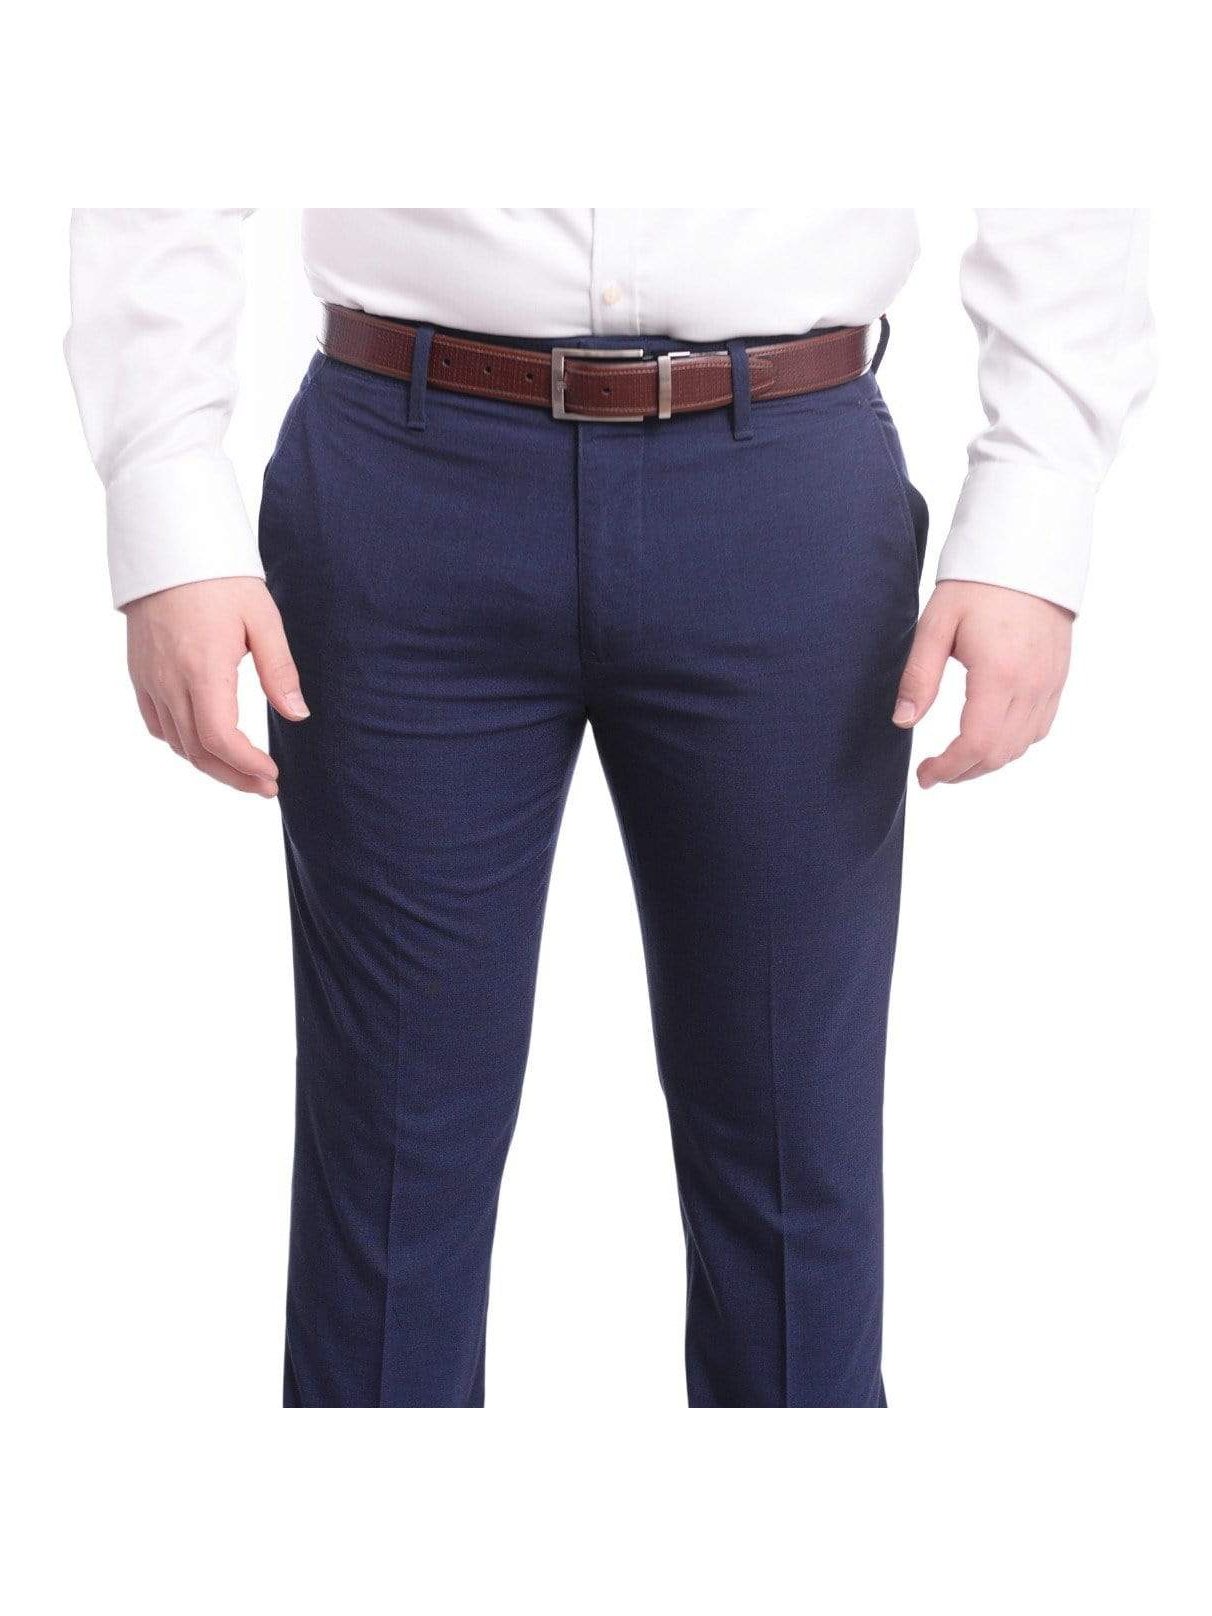 Mens Solid Navy Slim Fit Flat Front 4 Way Stretch Dress Pants